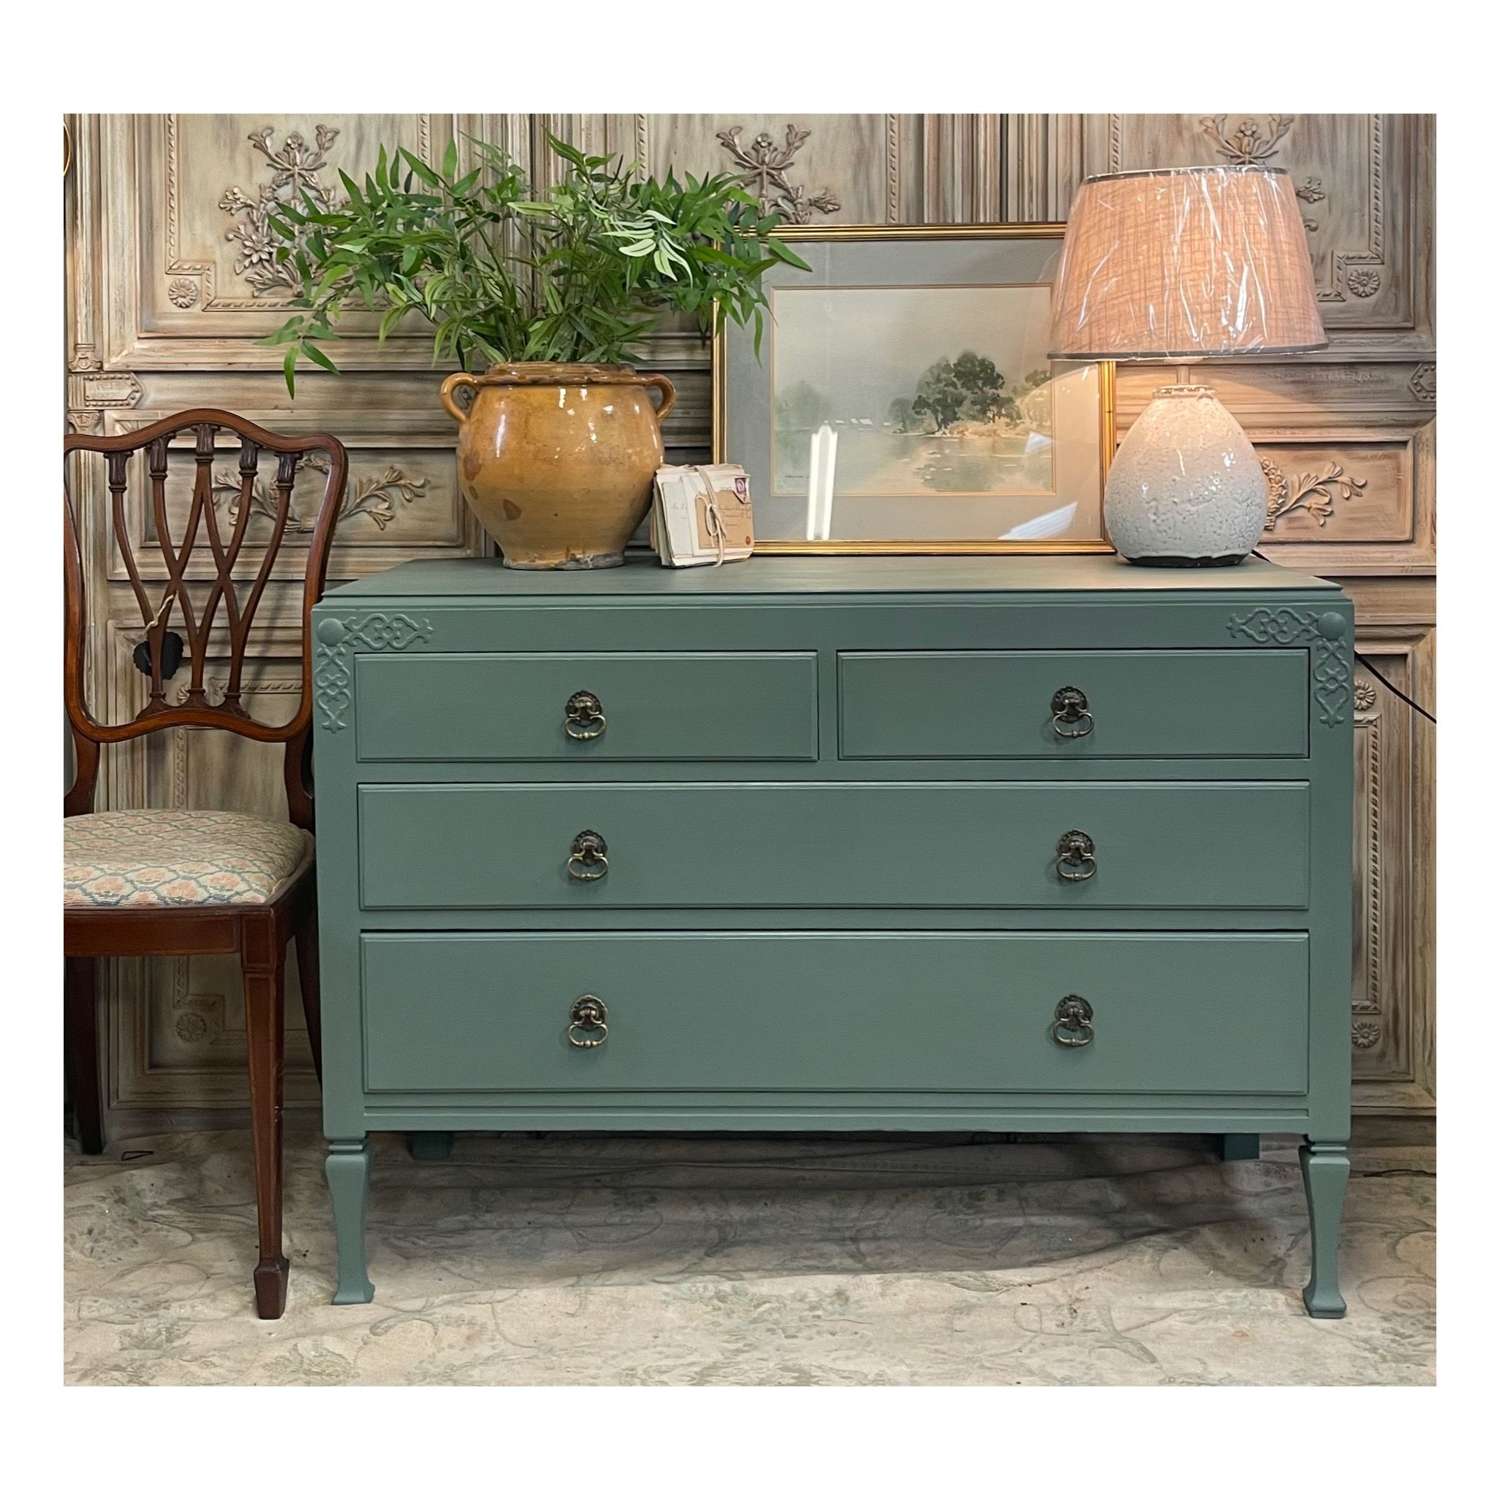 Antique chest of drawers in green smoke